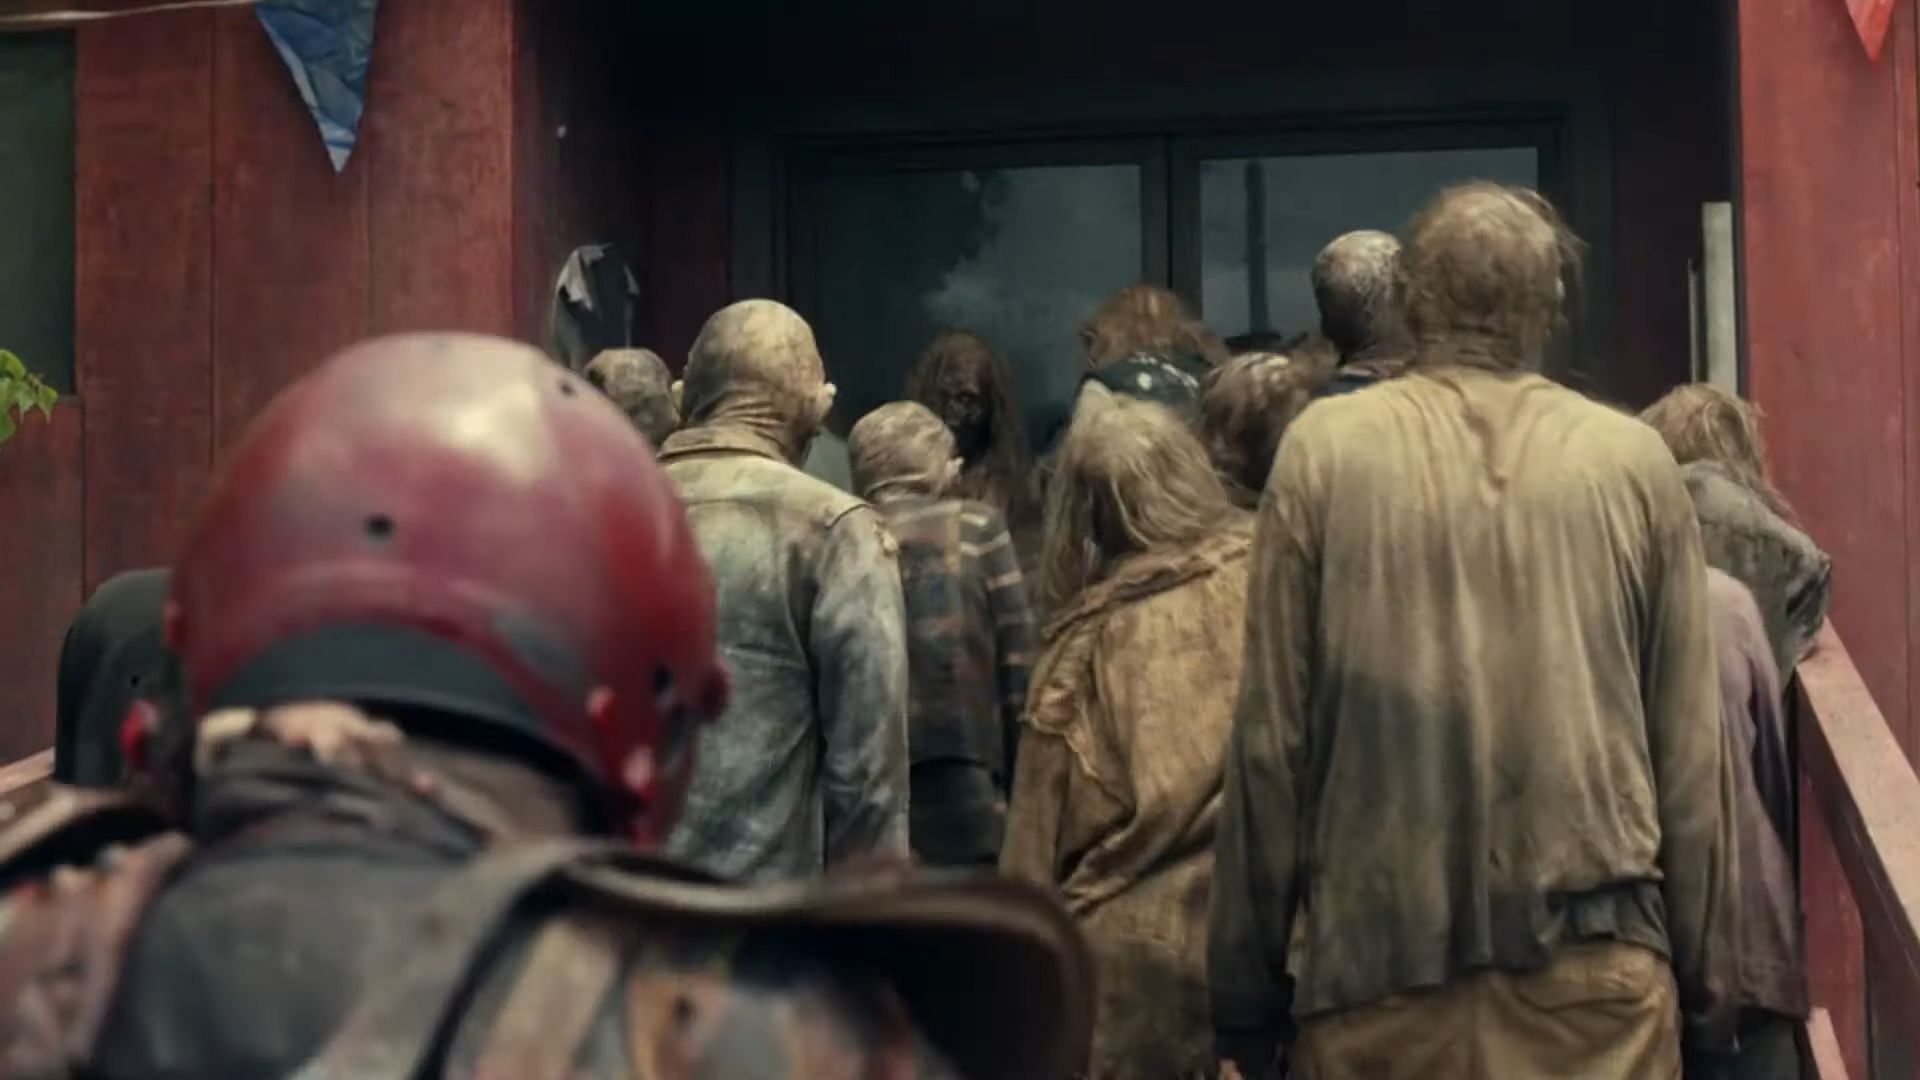 Screengrab captured from the official Fear the Walking Dead trailer (Image via AMC)